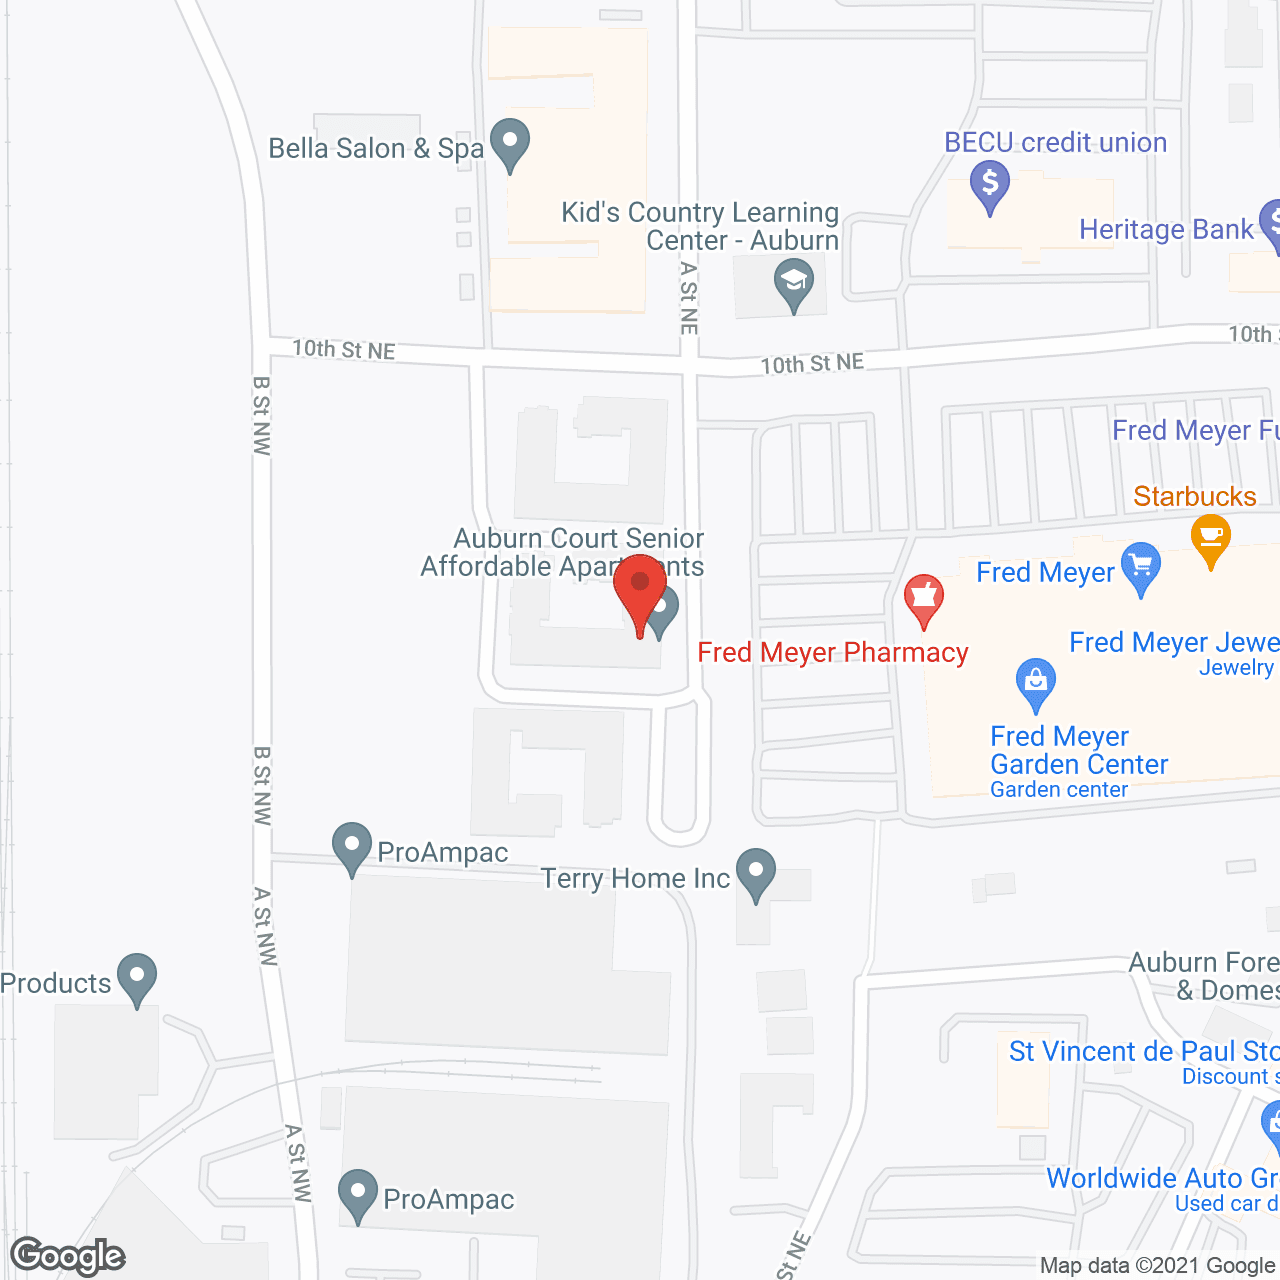 Senior Housing Assistance Group in google map